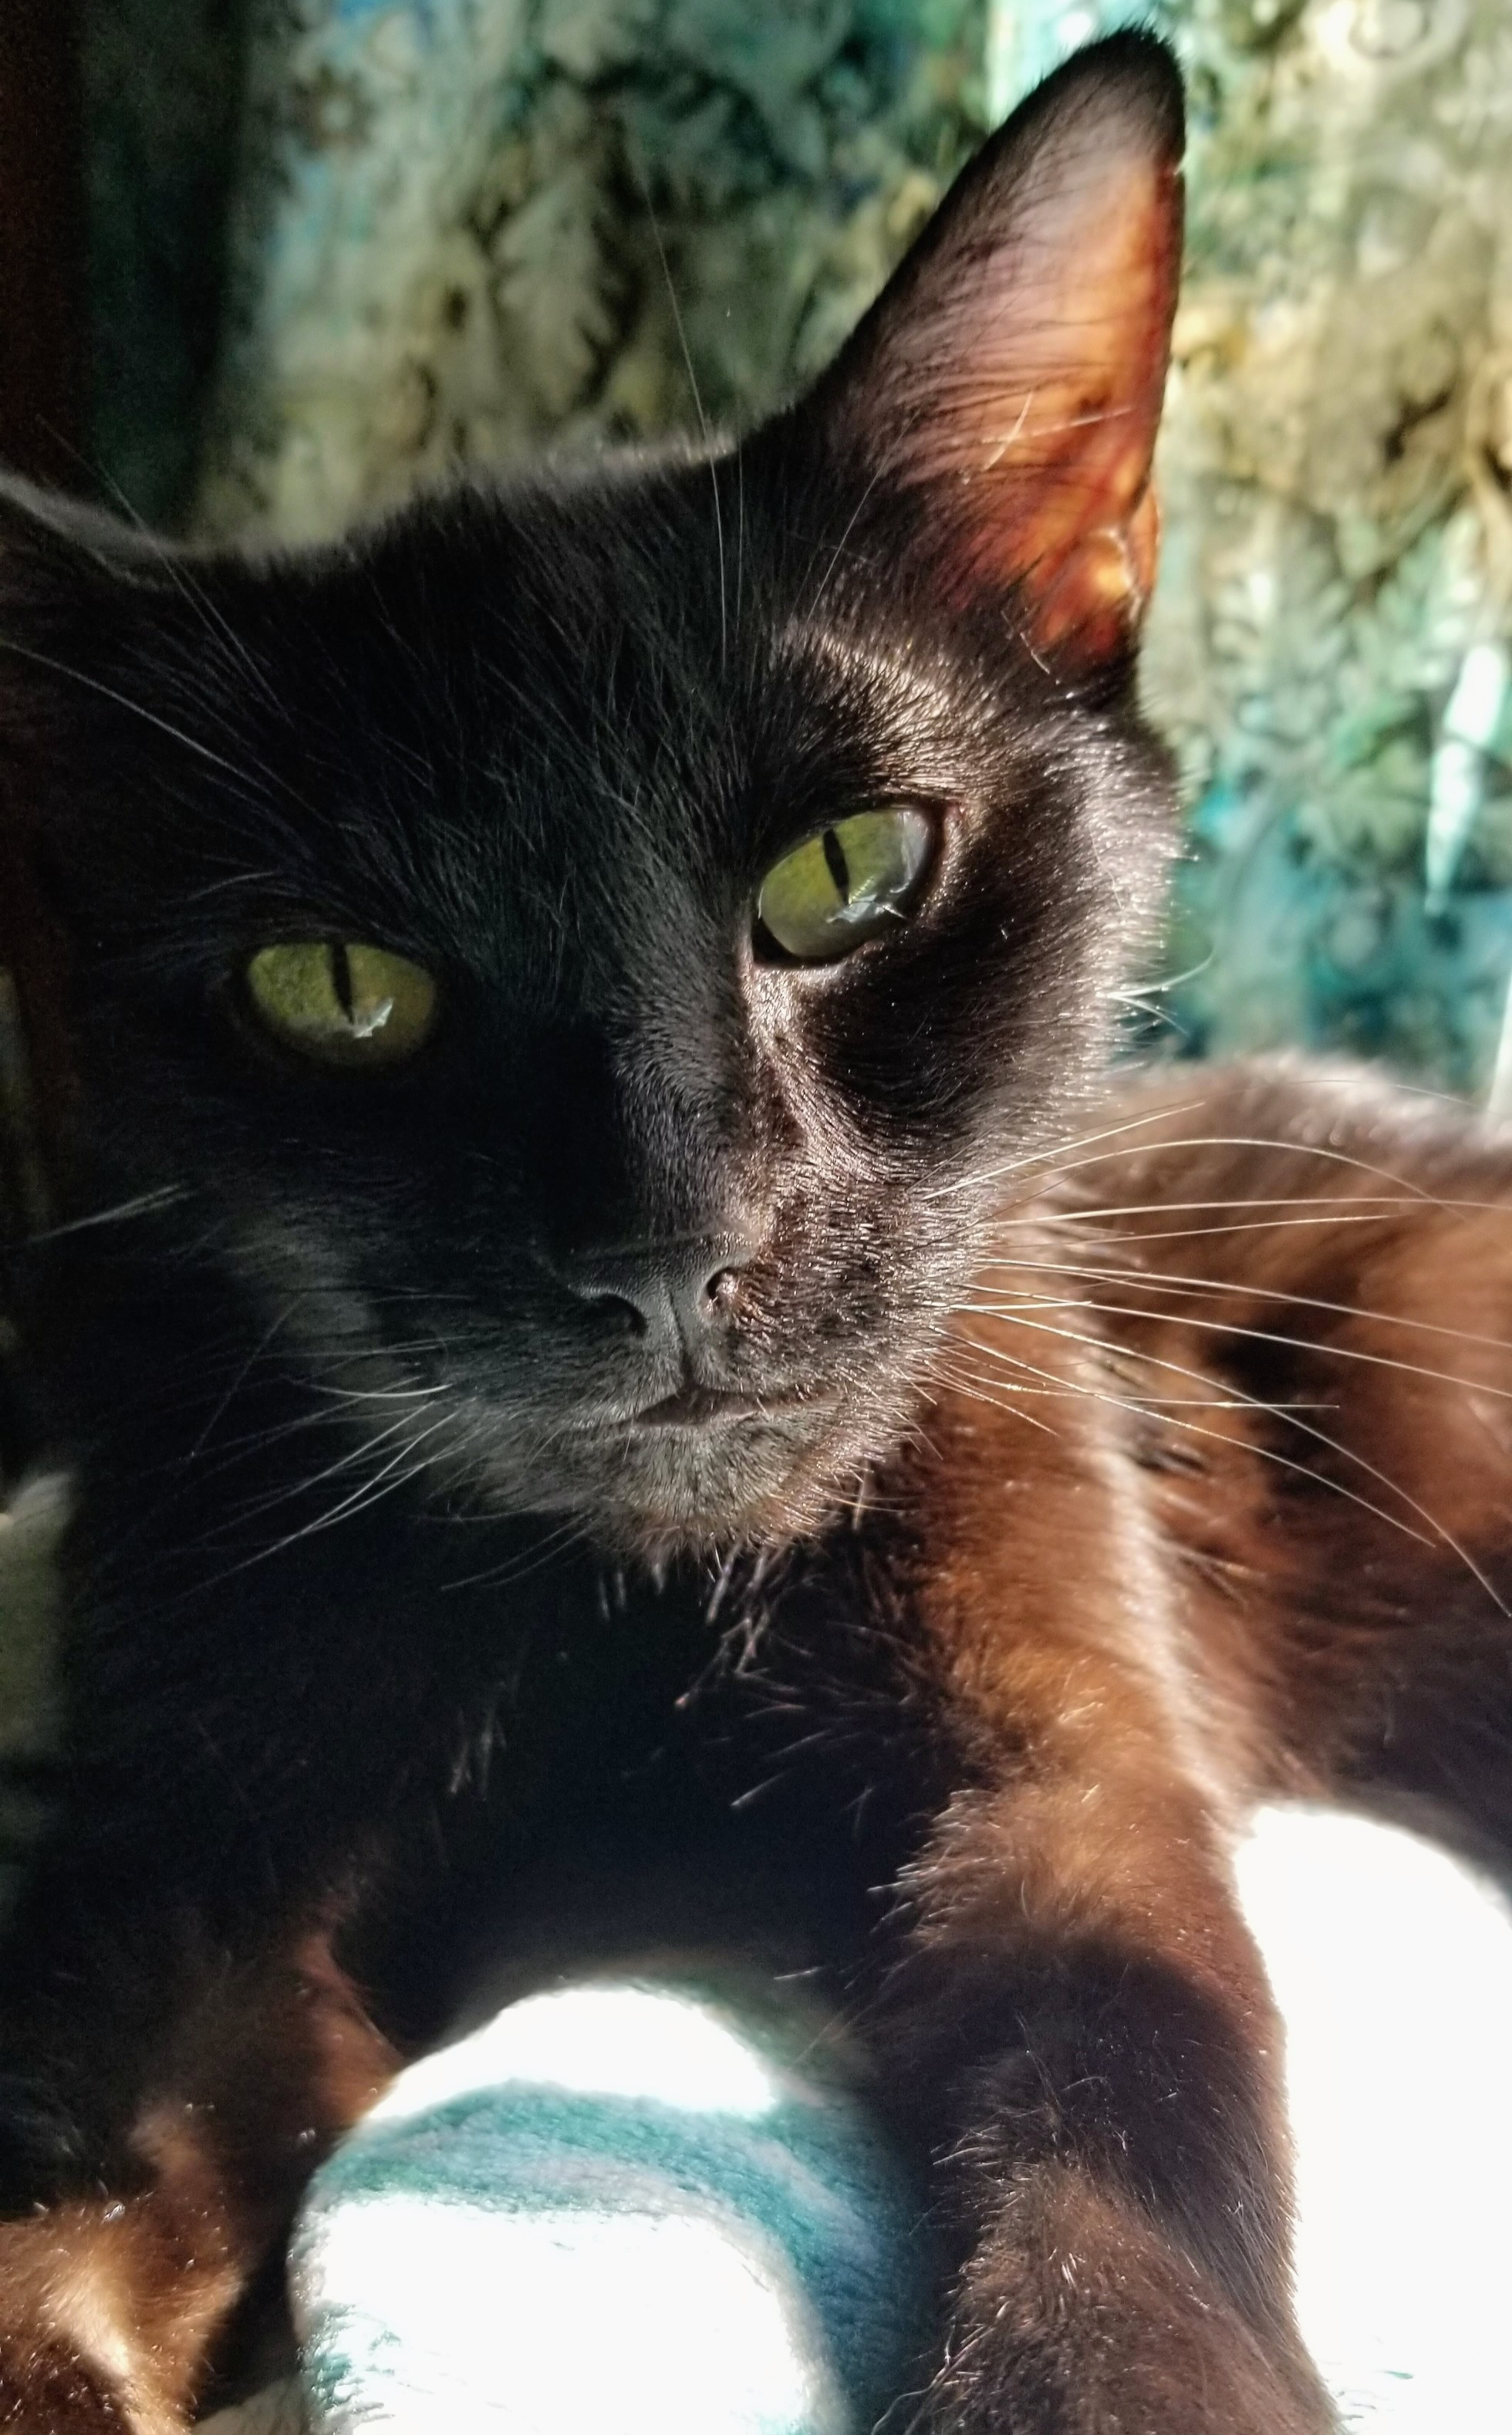 A beautiful black cat with a sweet face looking straight at the camera, big green eyes, with parts of her fur looking a warm brown in the bright sunlight coming in from the window beside her.